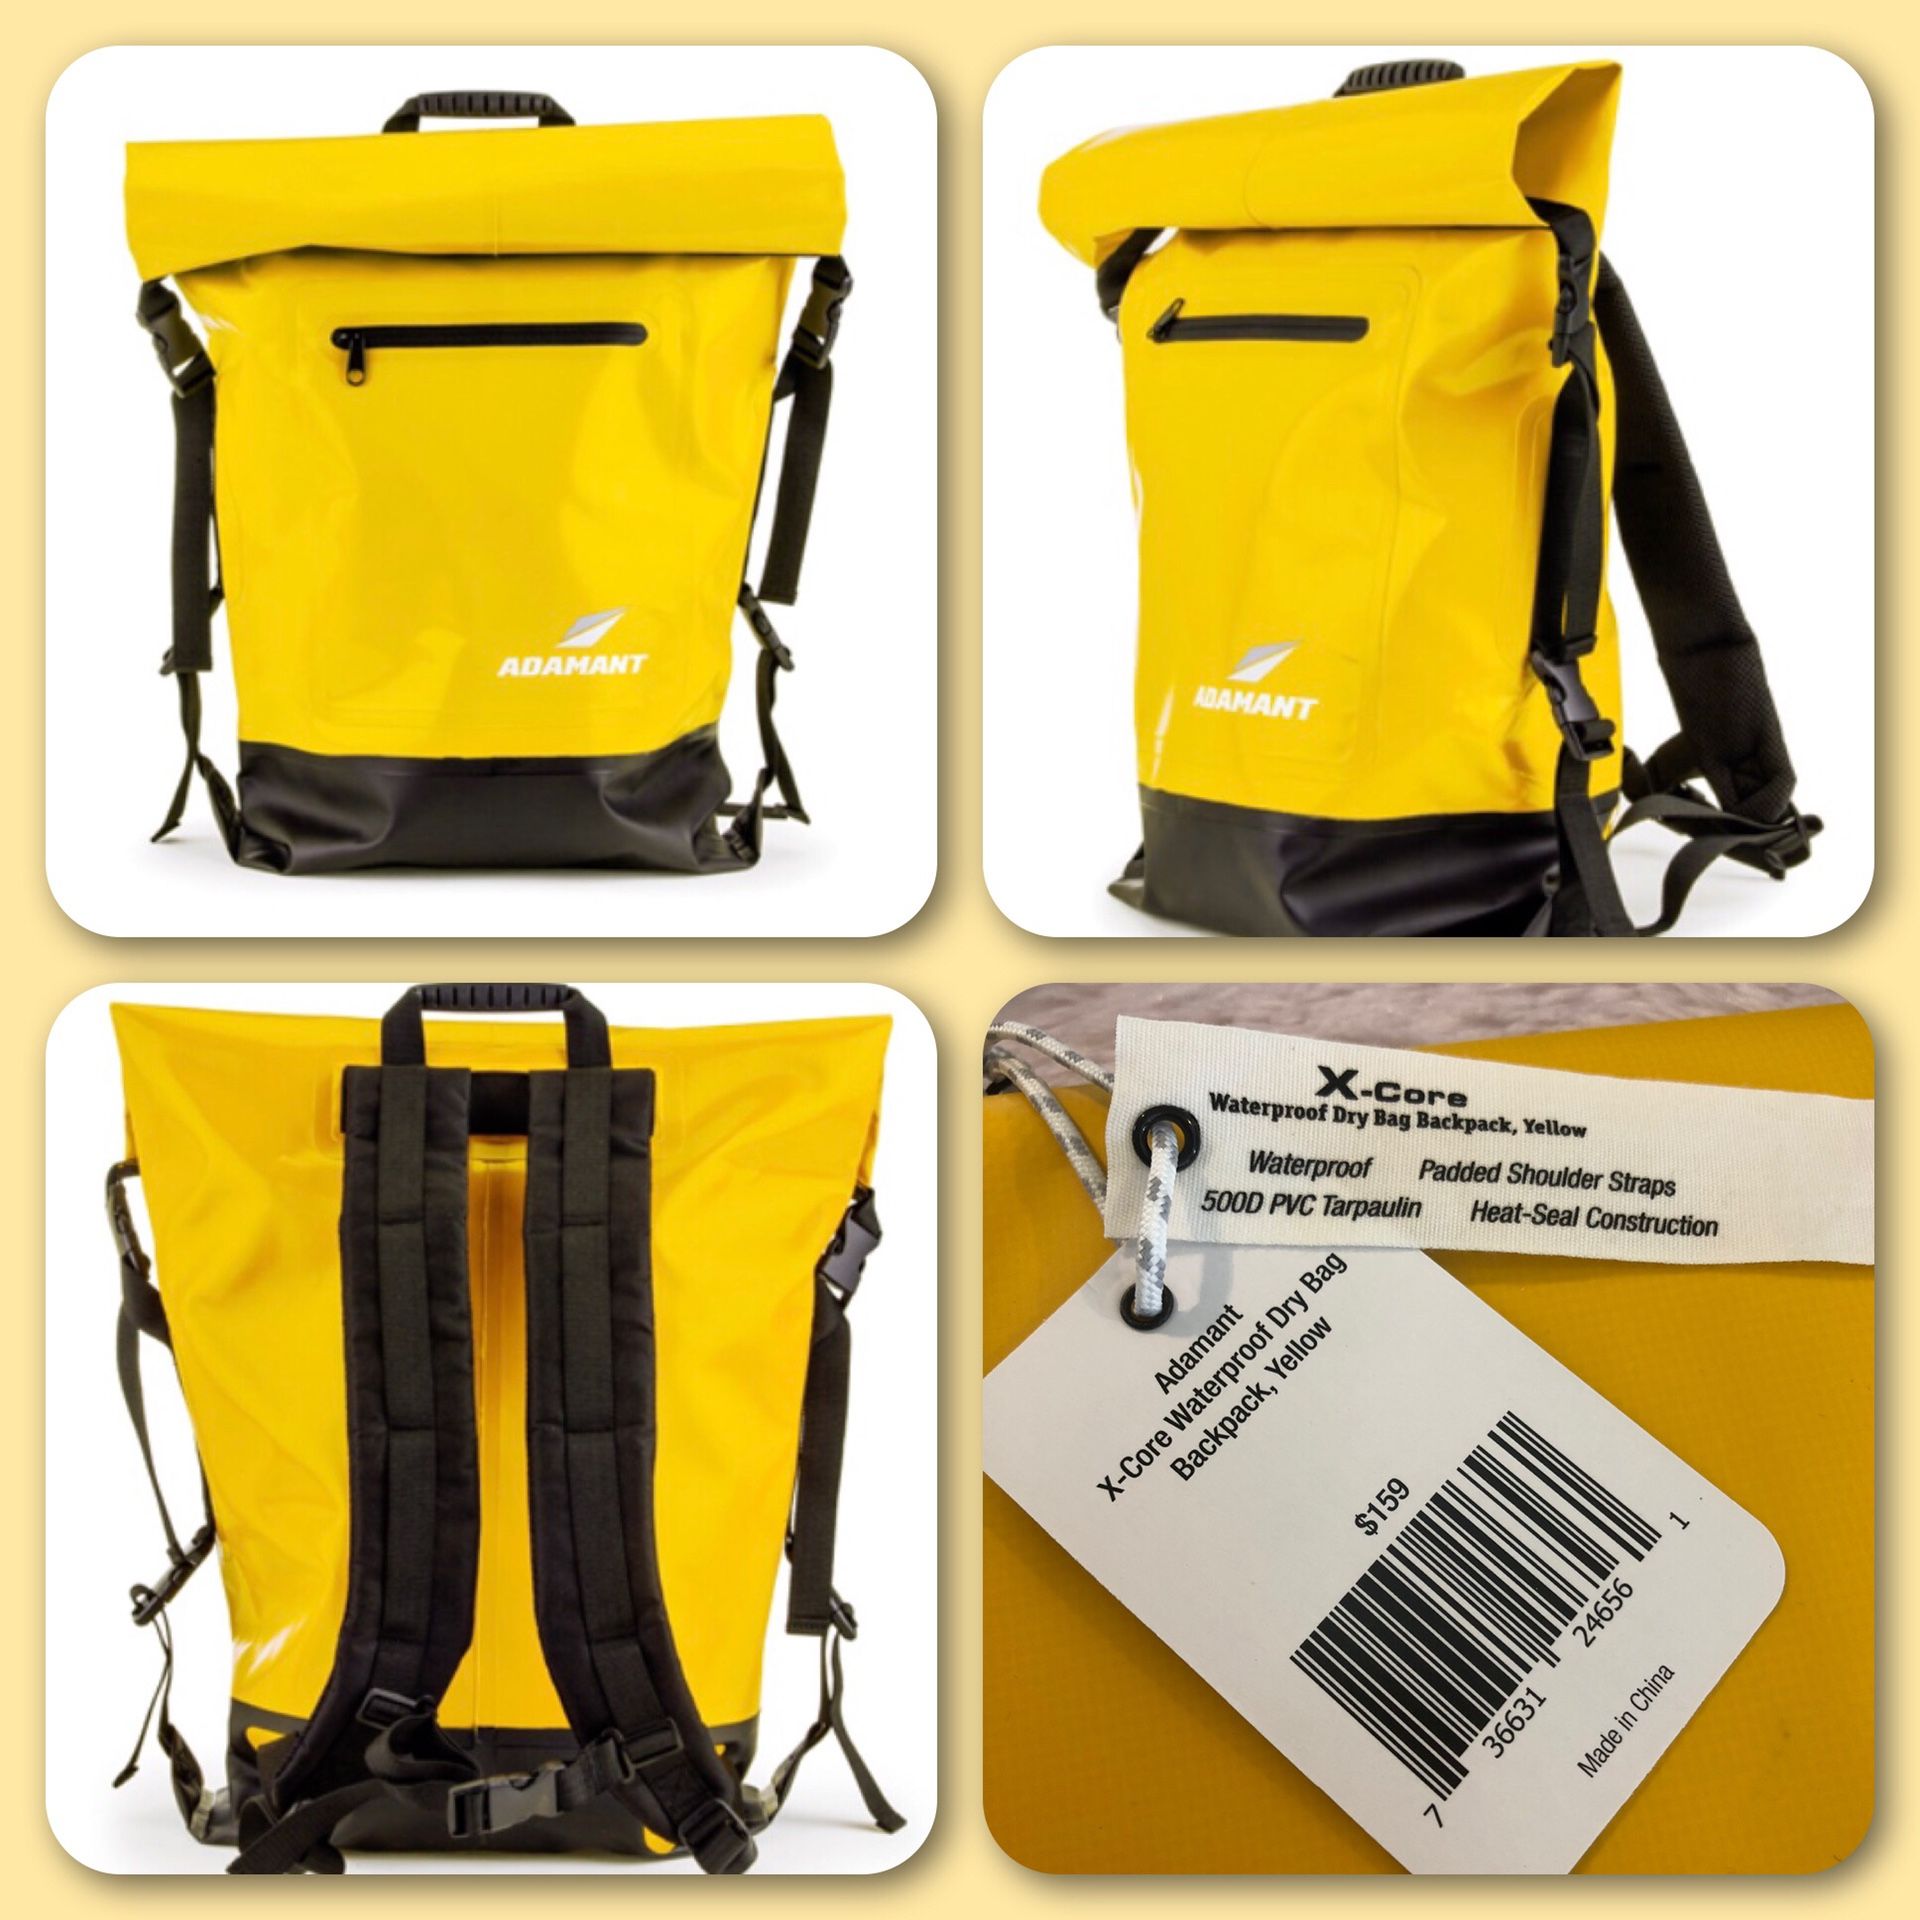 NEW! Adamant - X-Core Waterproof Dry Bag Backpack - Yellow. Retails for $159, Selling here for ONLY $50!!